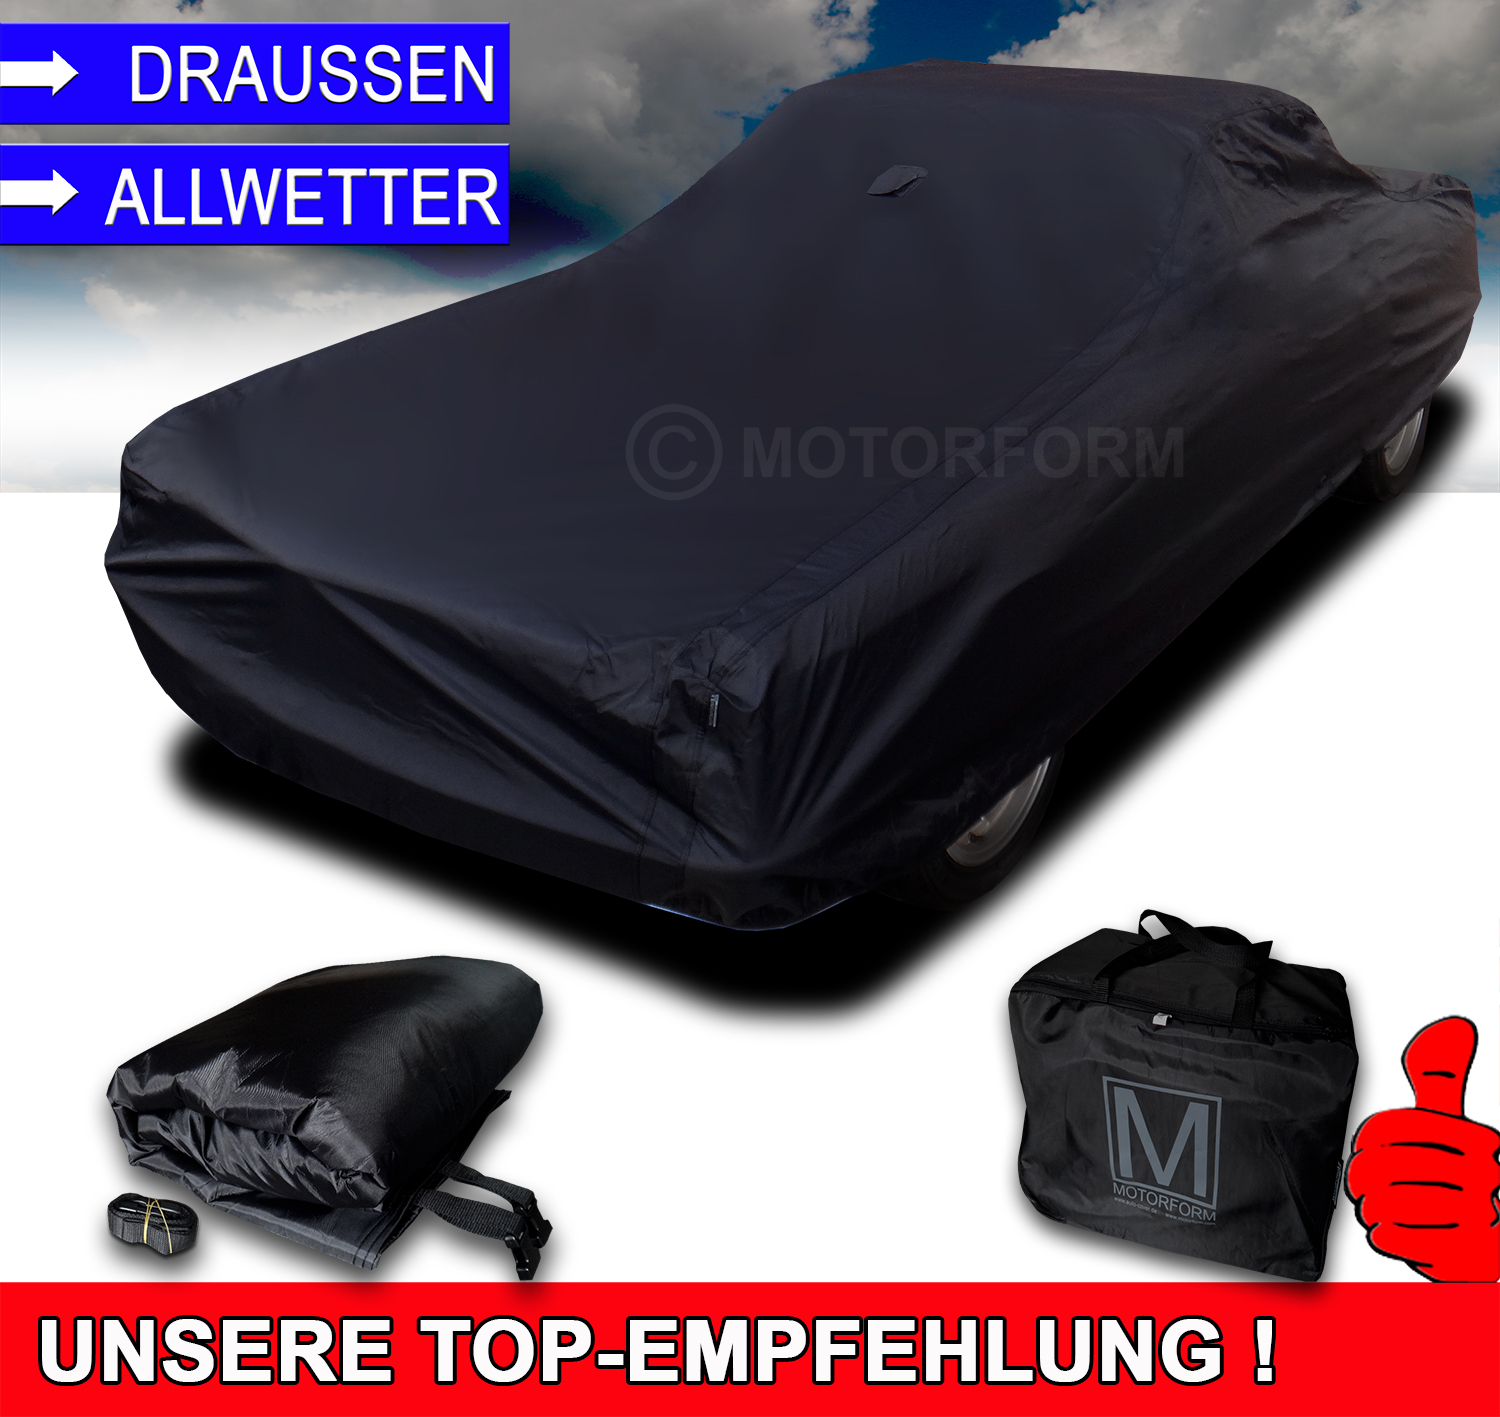 Optimo Outdoor Car Cover for Dodge length of car 5.51 - 5.80m